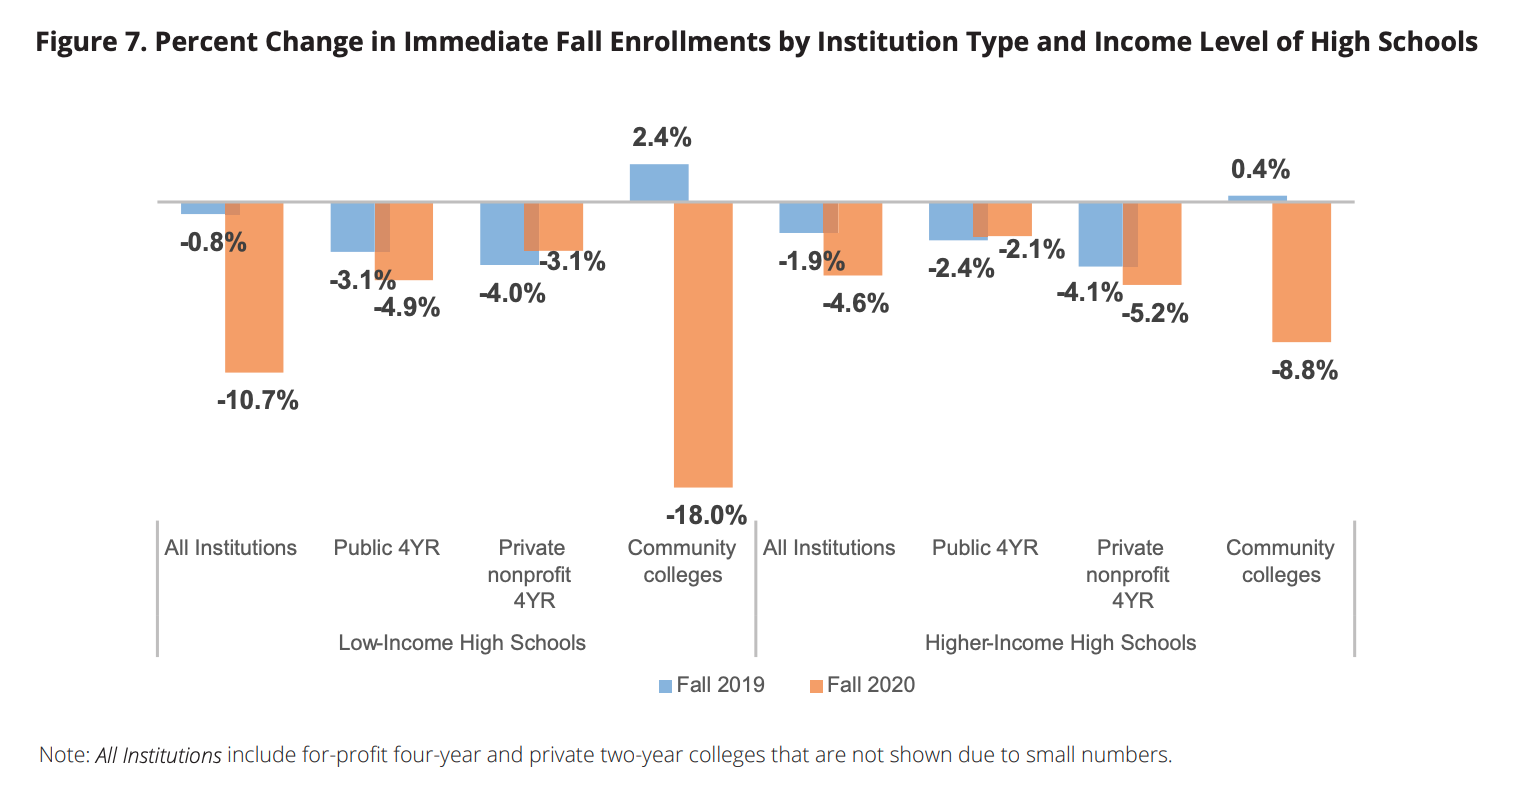 Percent Change in Immediate Fall Enrollments by Institution Type and Income Level of High Schools.